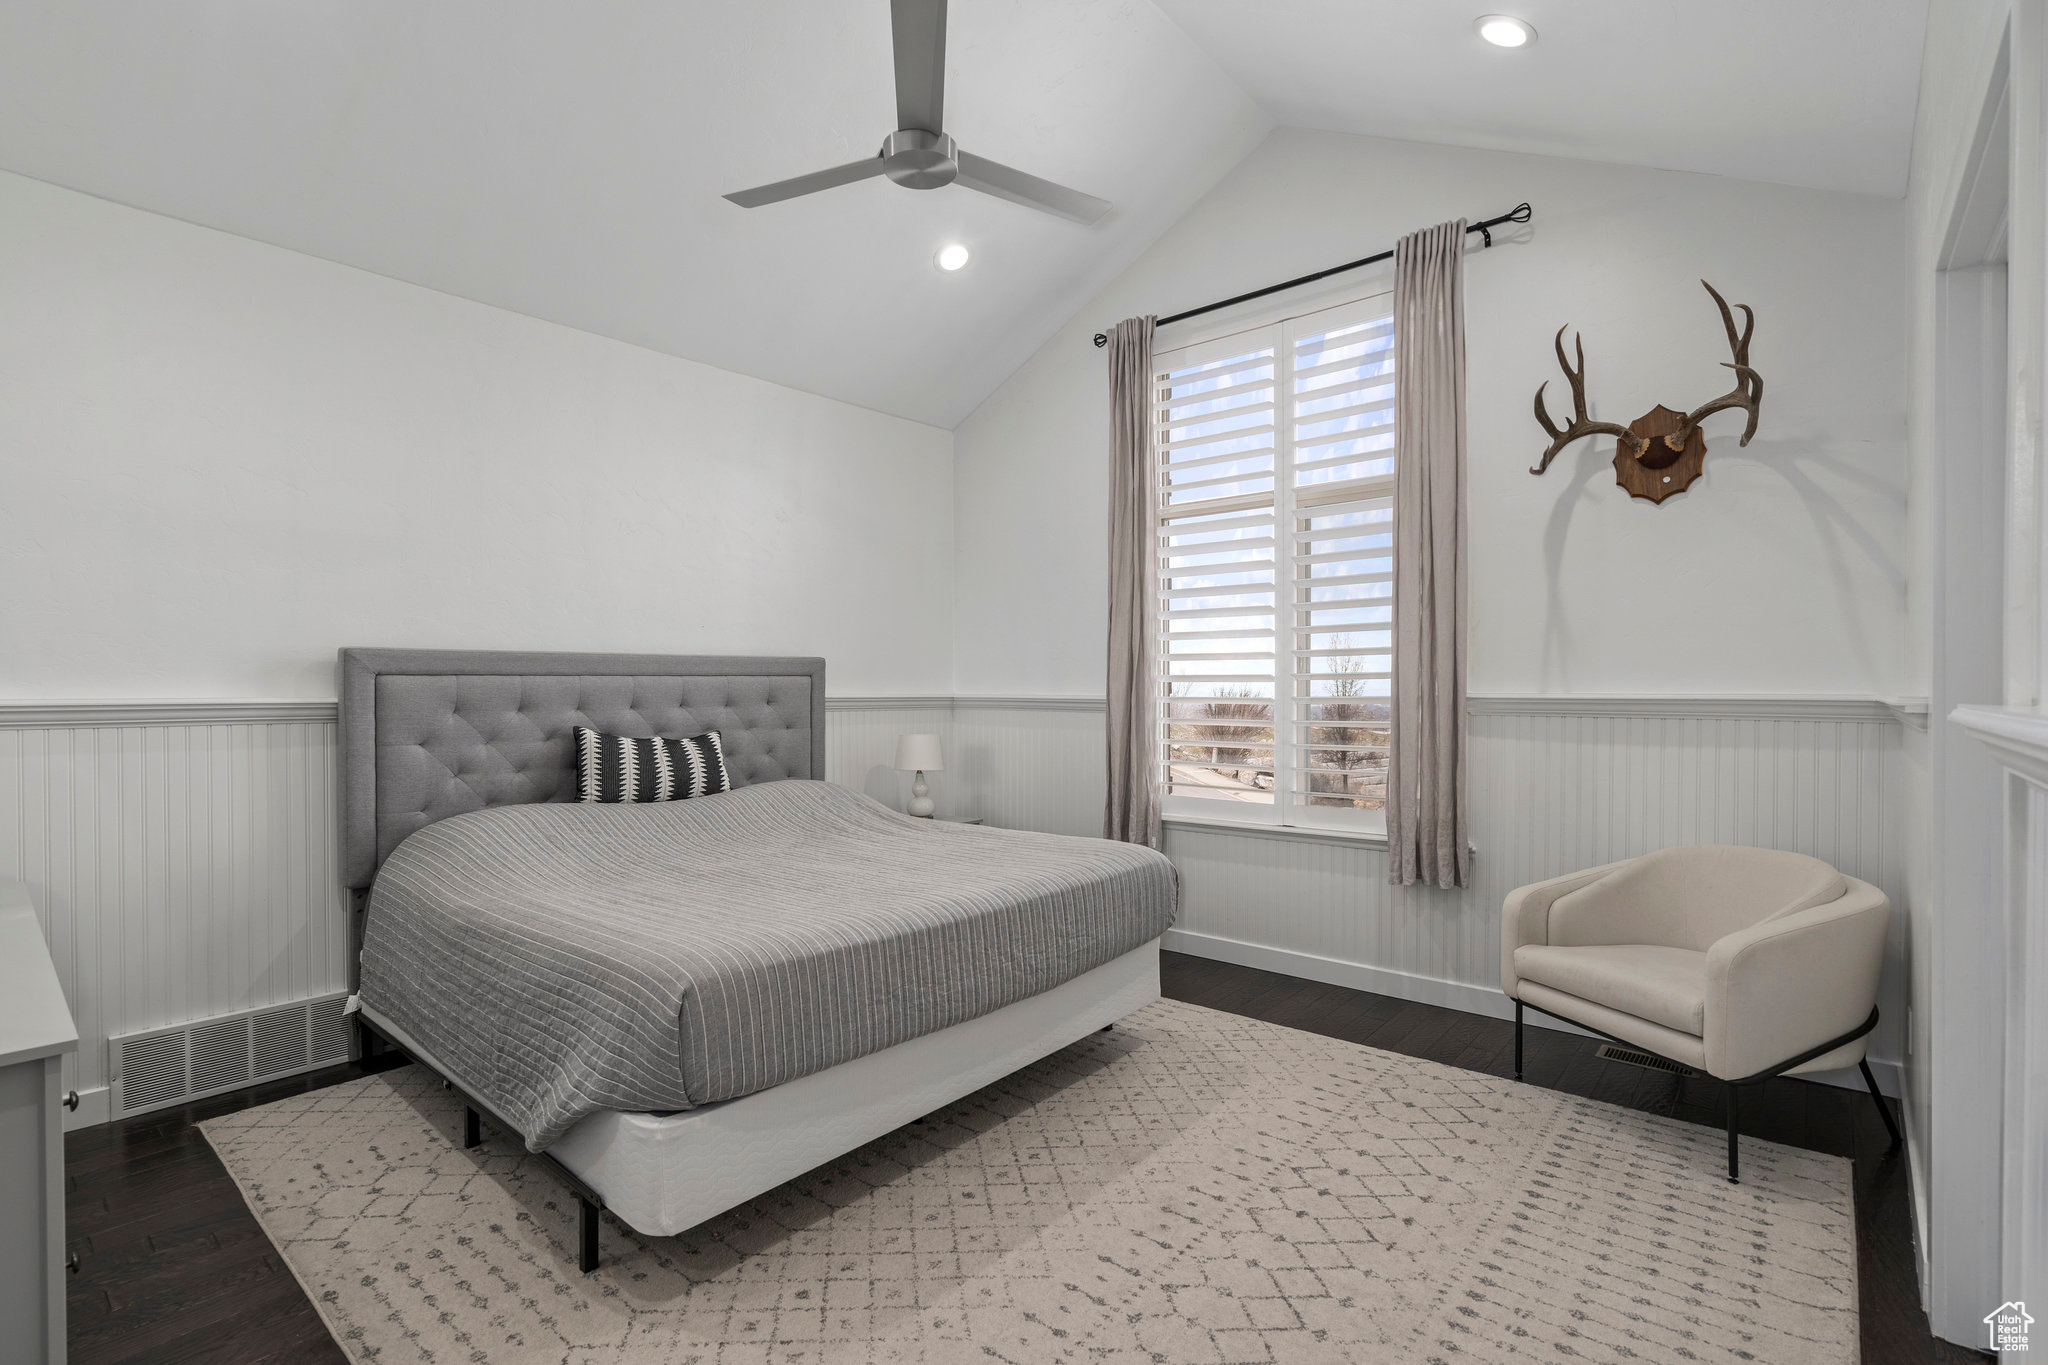 Main level bedroom with lofted ceiling, dark hardwood / wood-style flooring, and ceiling fan